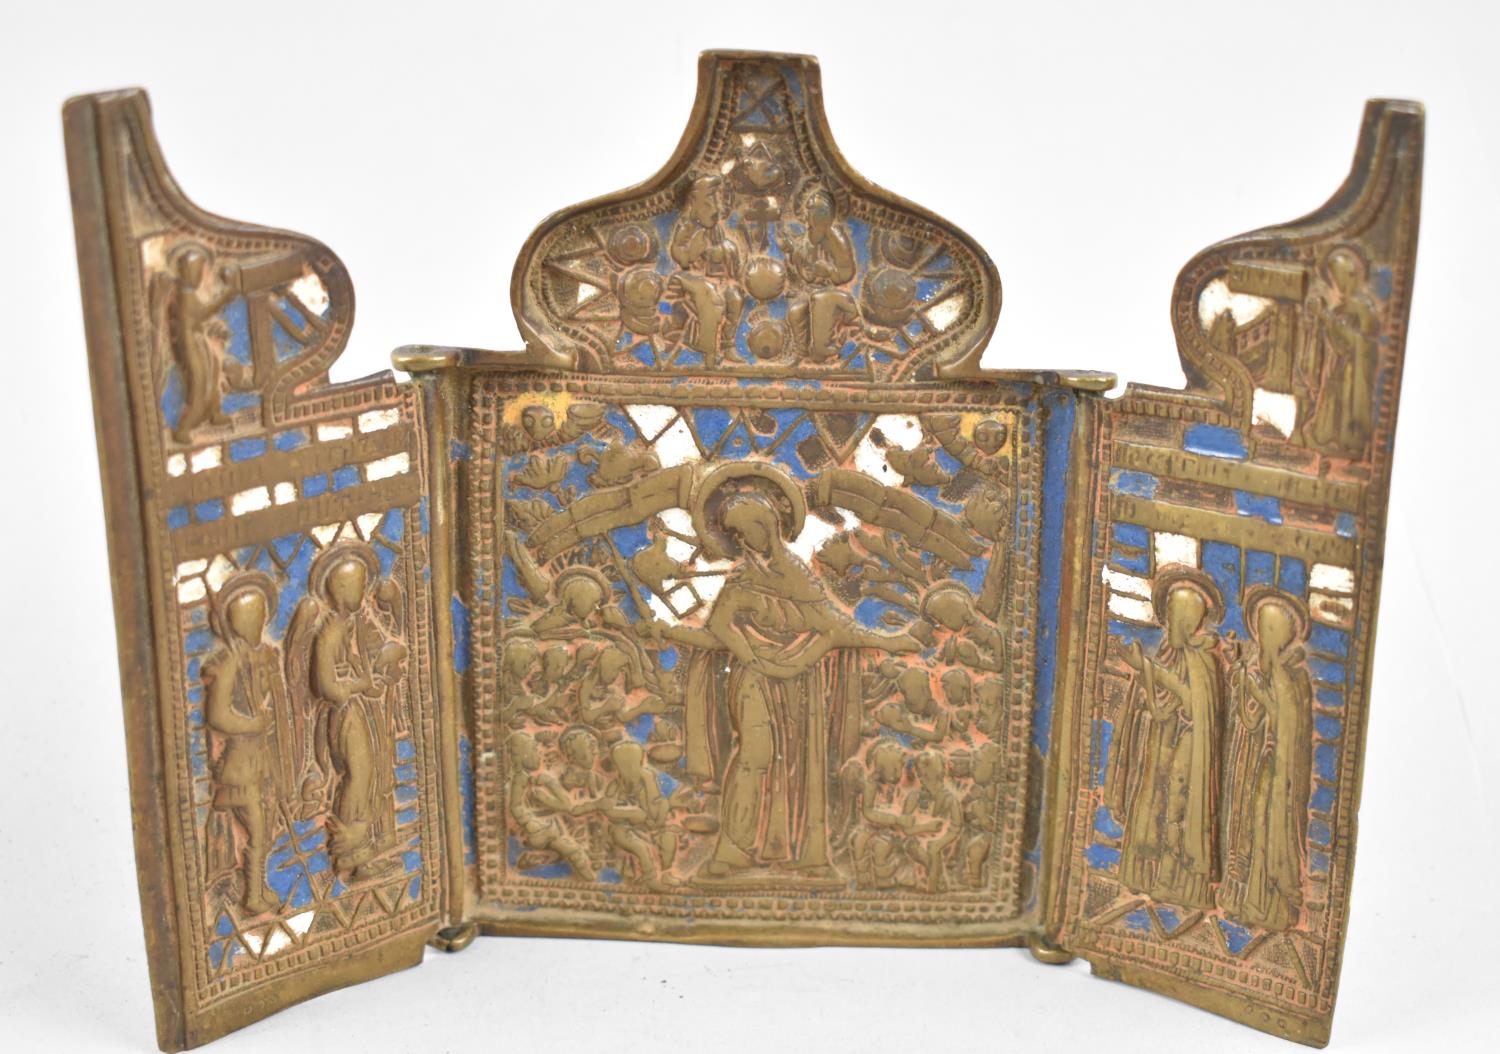 A Late 18th/Early 19th Century Cast Brass and Blue and White Enamelled Russian Travelling Triptych